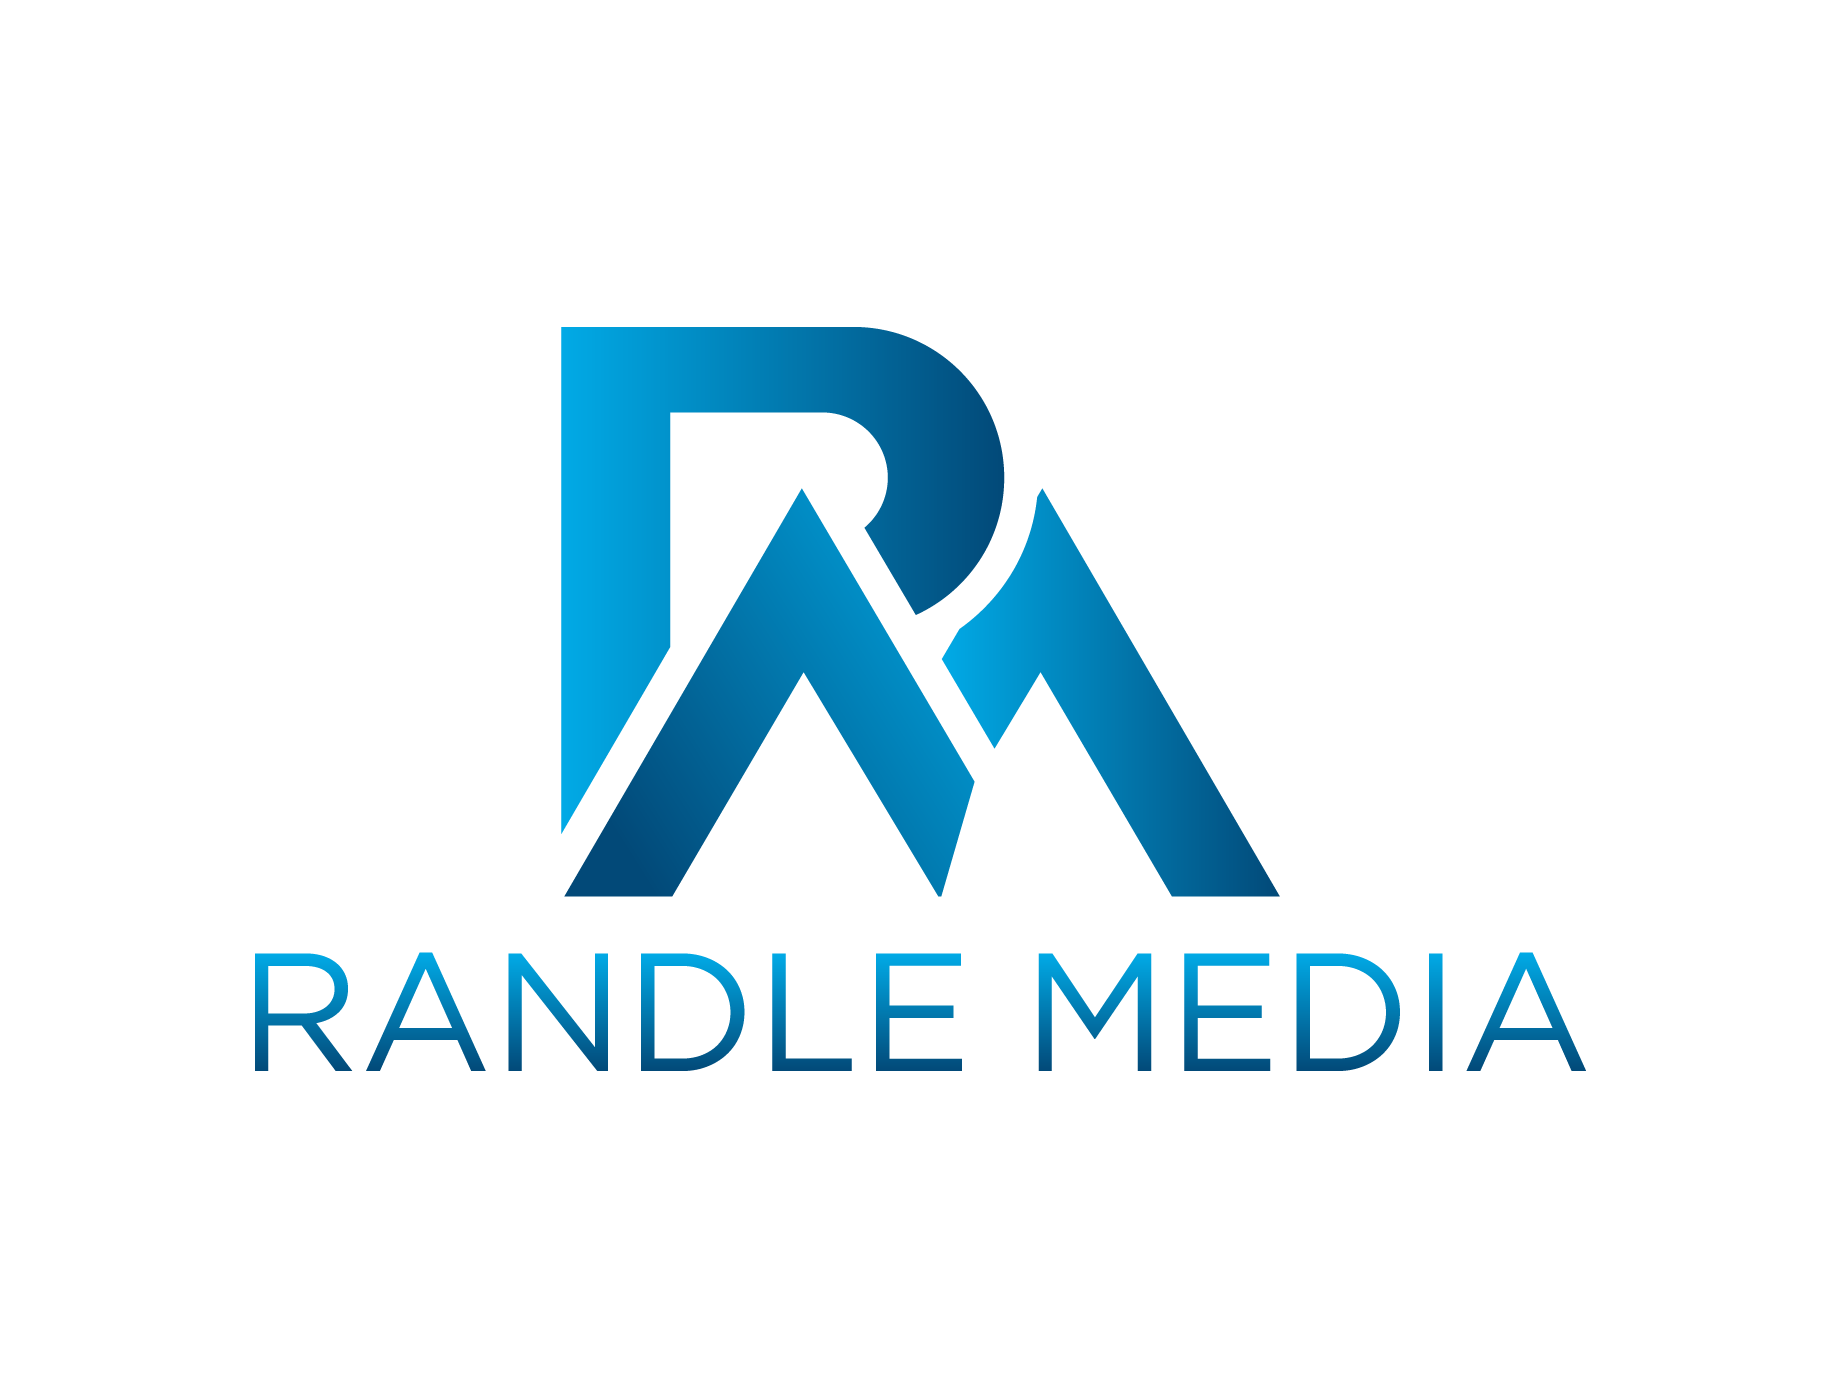 Randle Media Deputes Highly Anticipated "RM Credibility Kit" For Business Owners